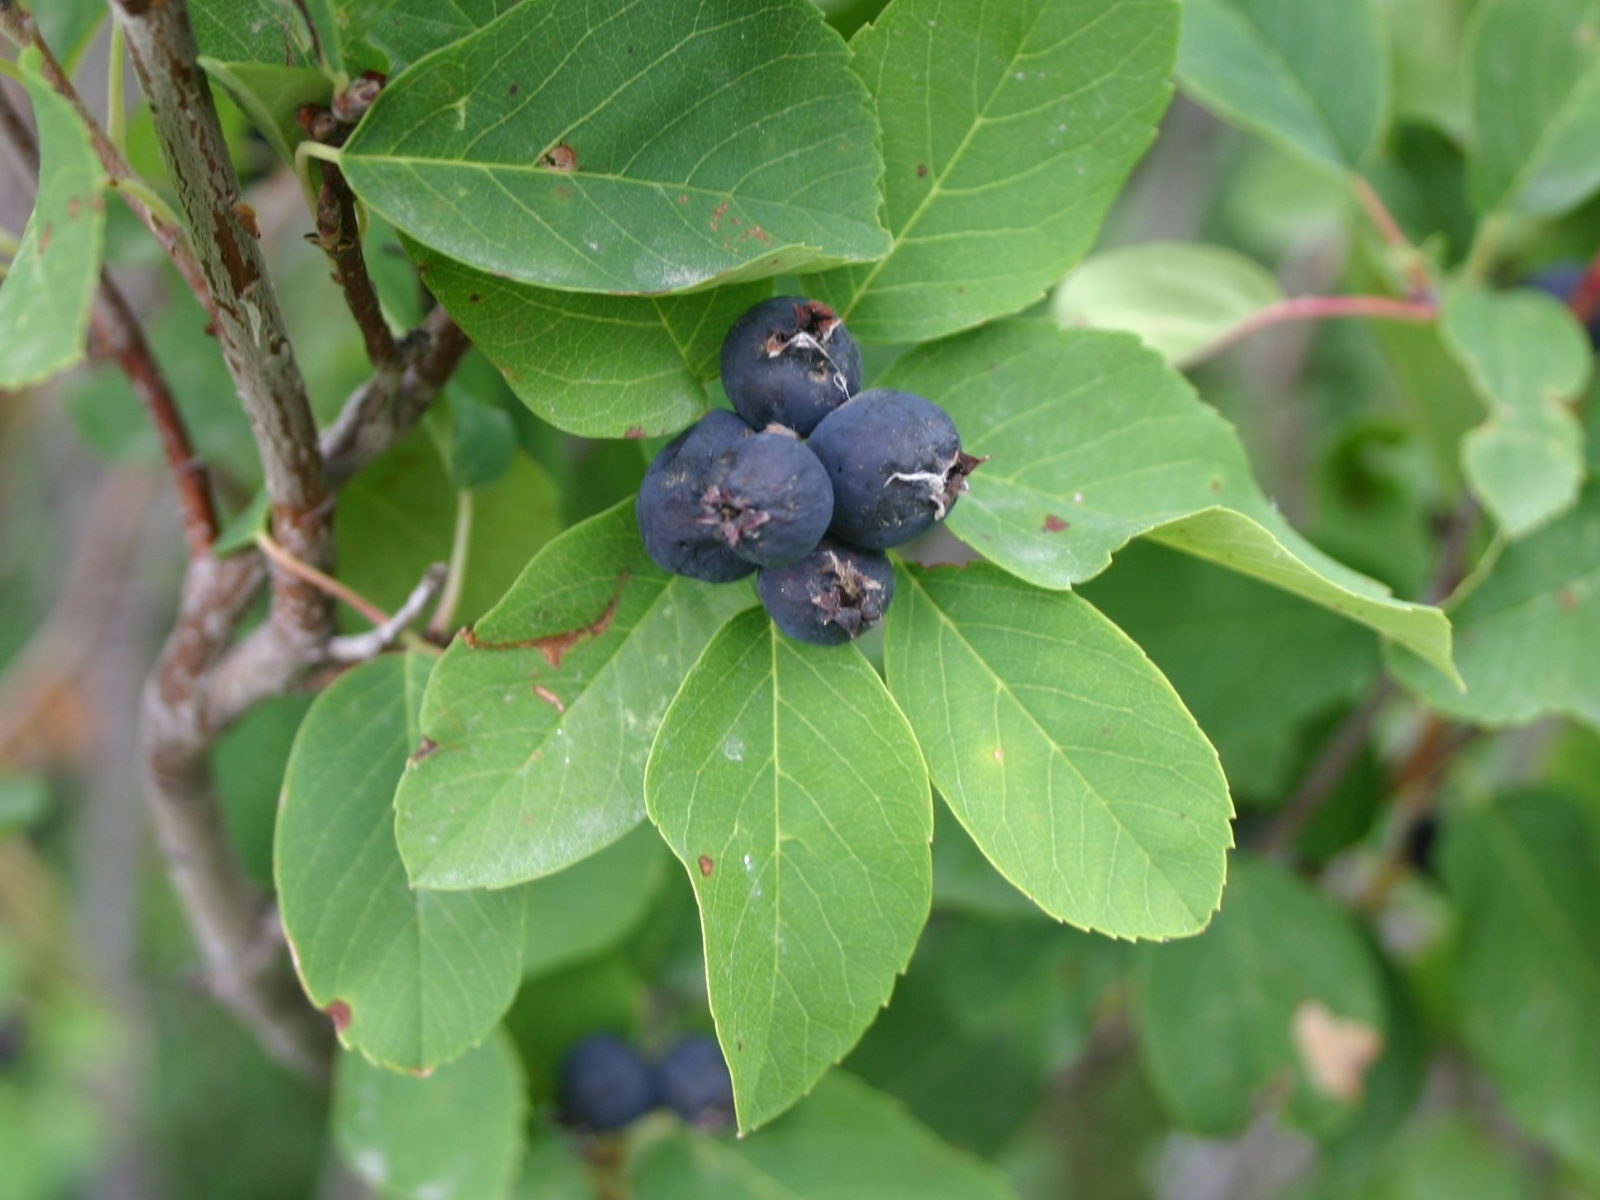 A cluster of small blue-purple berries growing among green leaves on a bush.